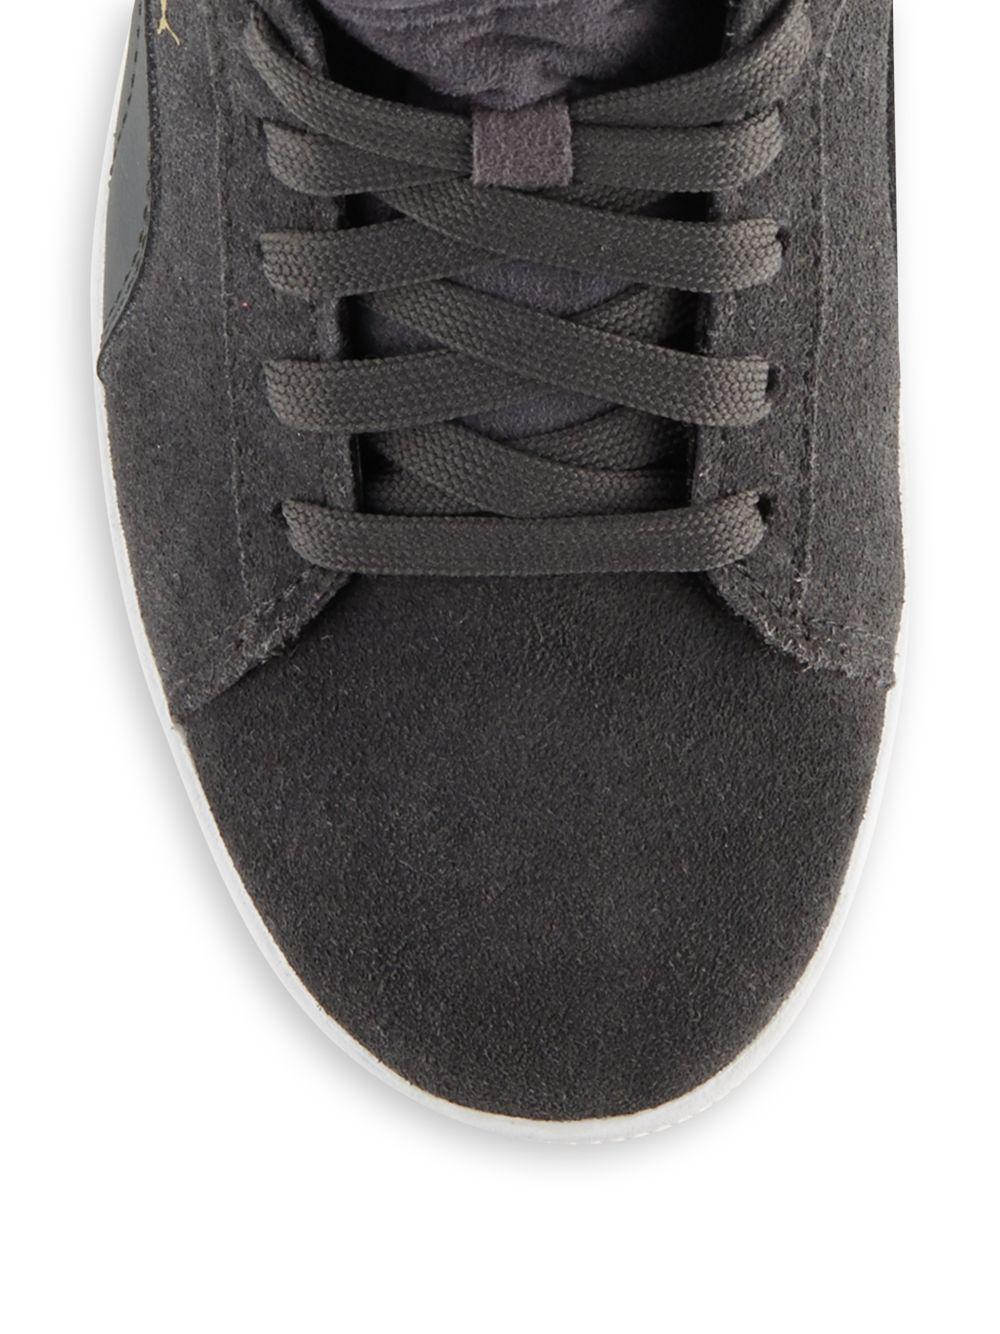 PUMA Leather Vikky Wedge Hightop Sneakers in Grey (Gray) - Lyst